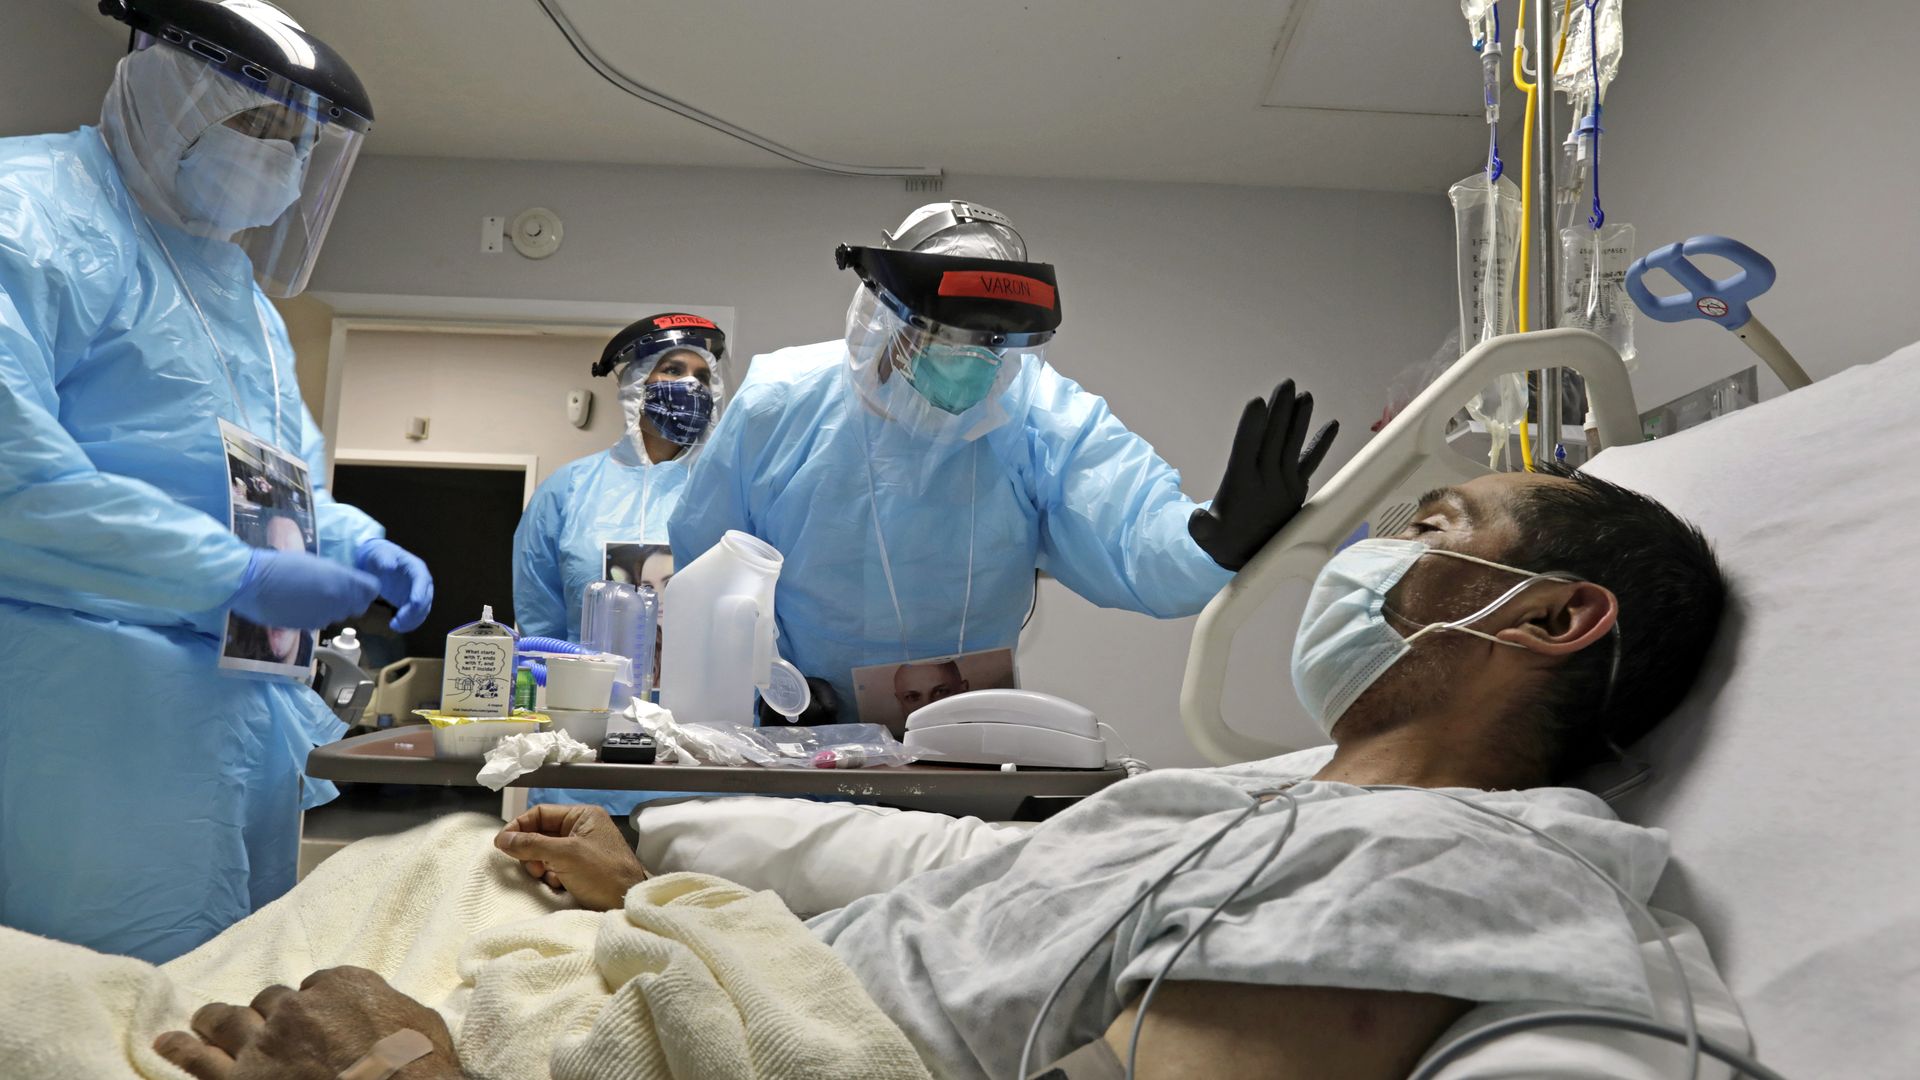 A man lays in bed while masked medical workers stand above him 